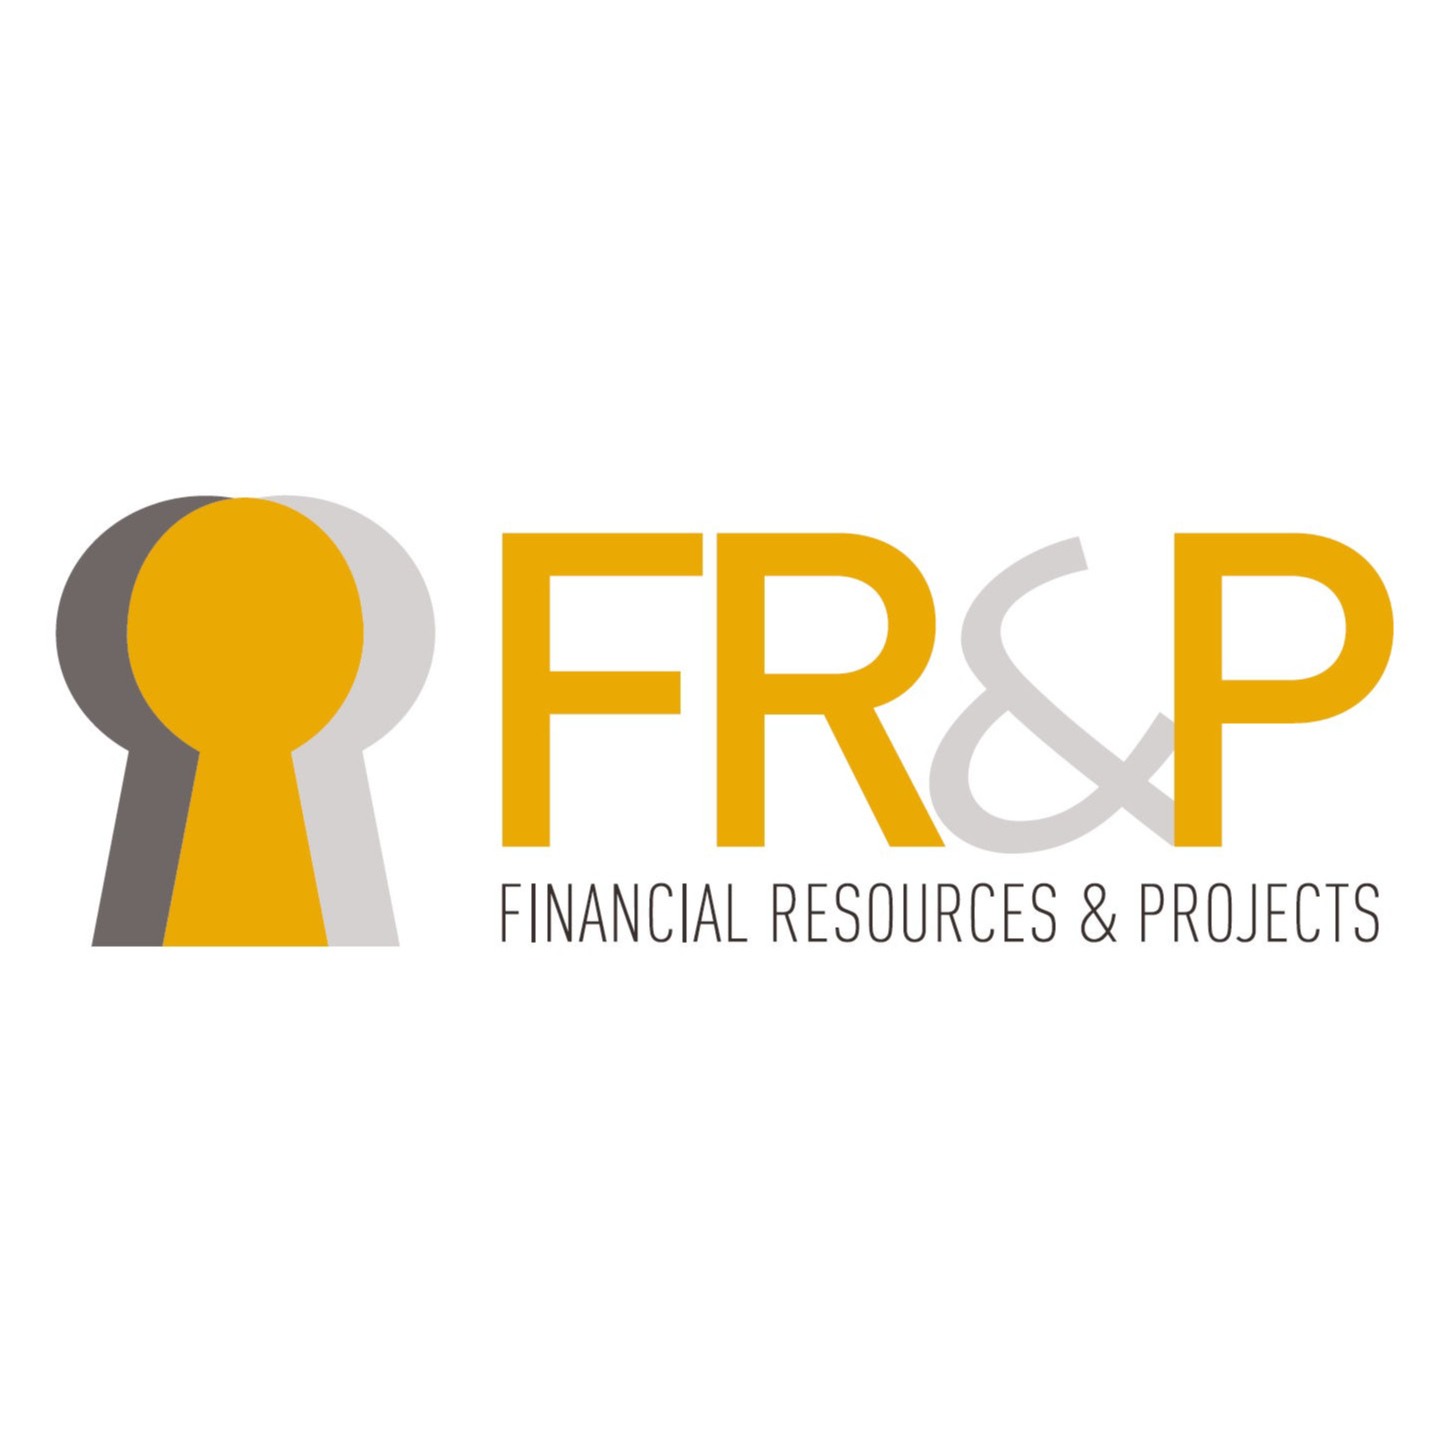 Financial Resources & Projects